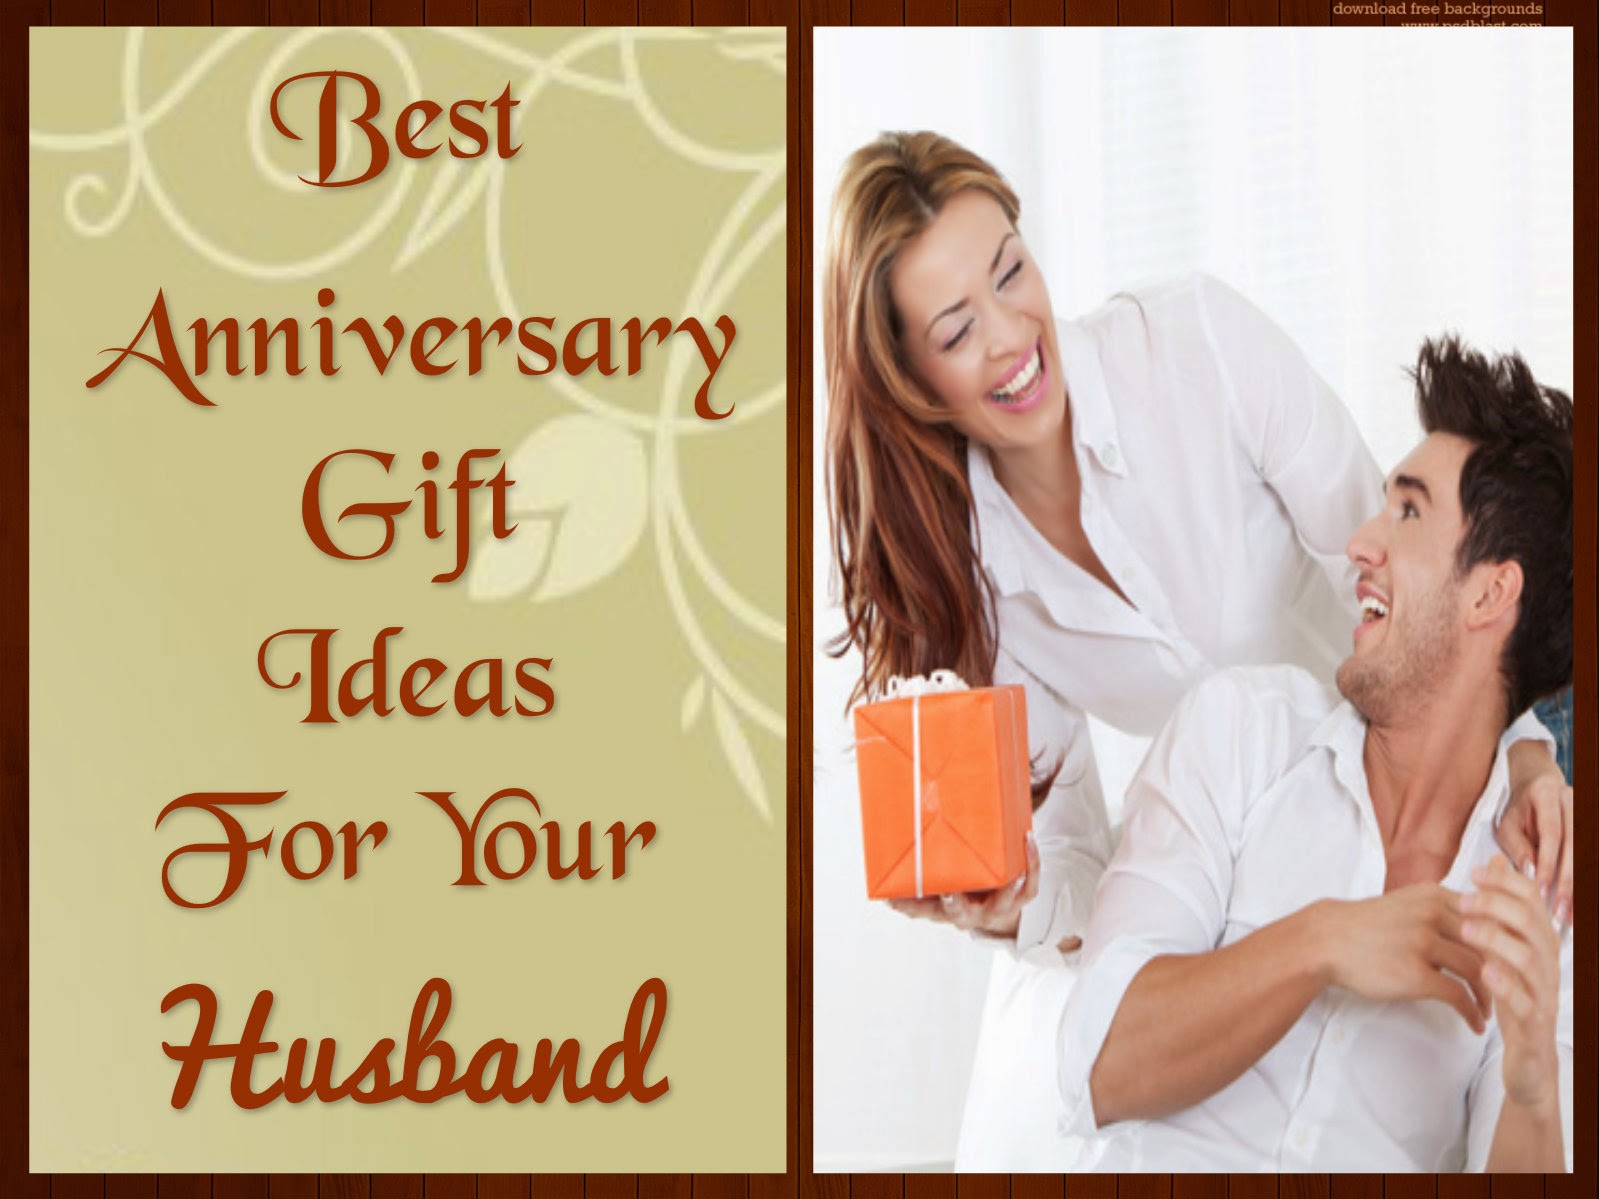 Wedding Anniversary Gifts: Best Anniversary Gift Ideas For ...